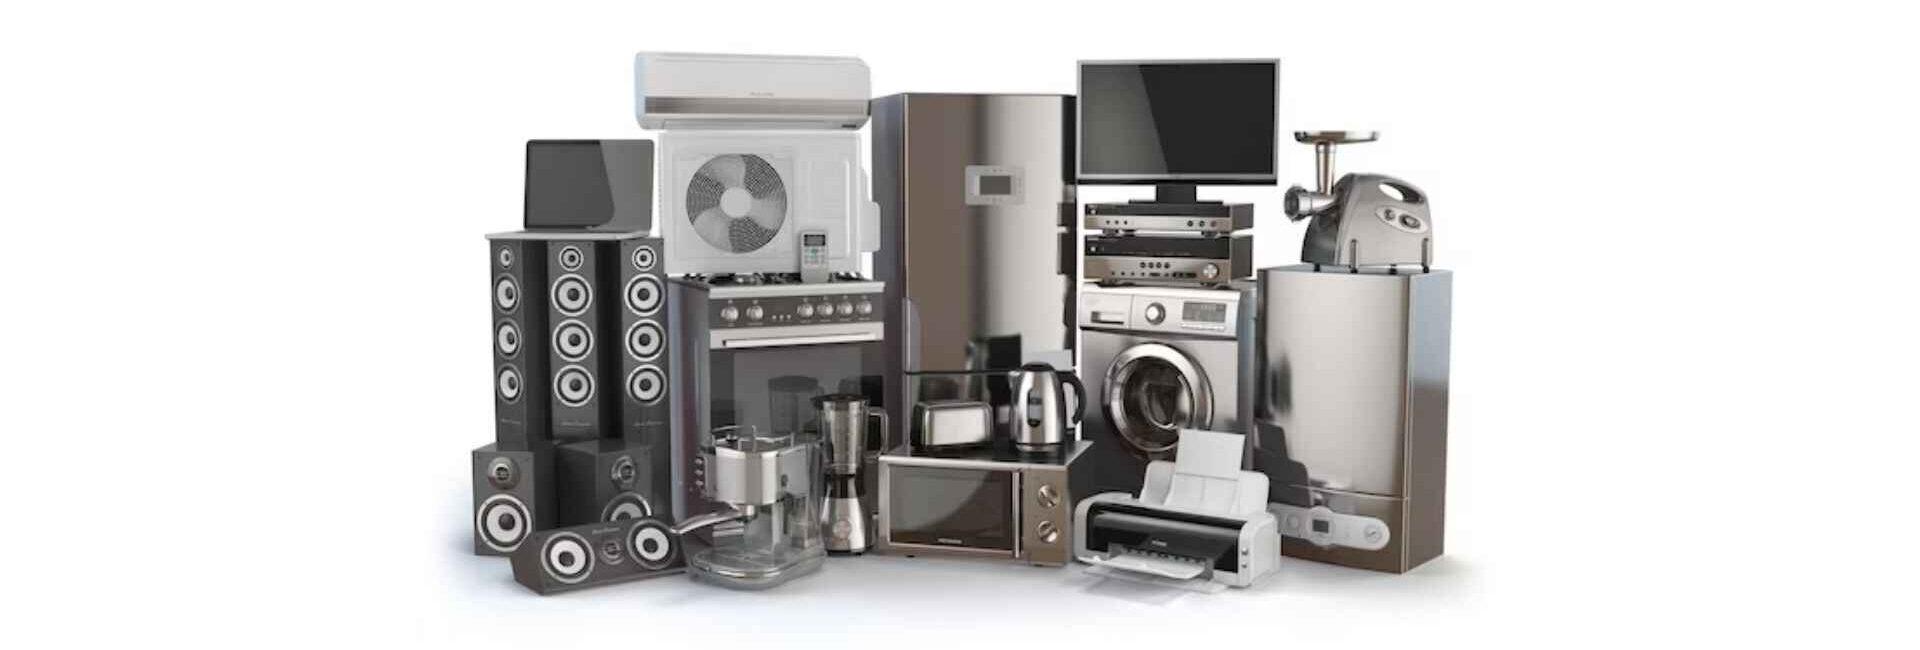 N .C. Electronic - home appliances in Noida